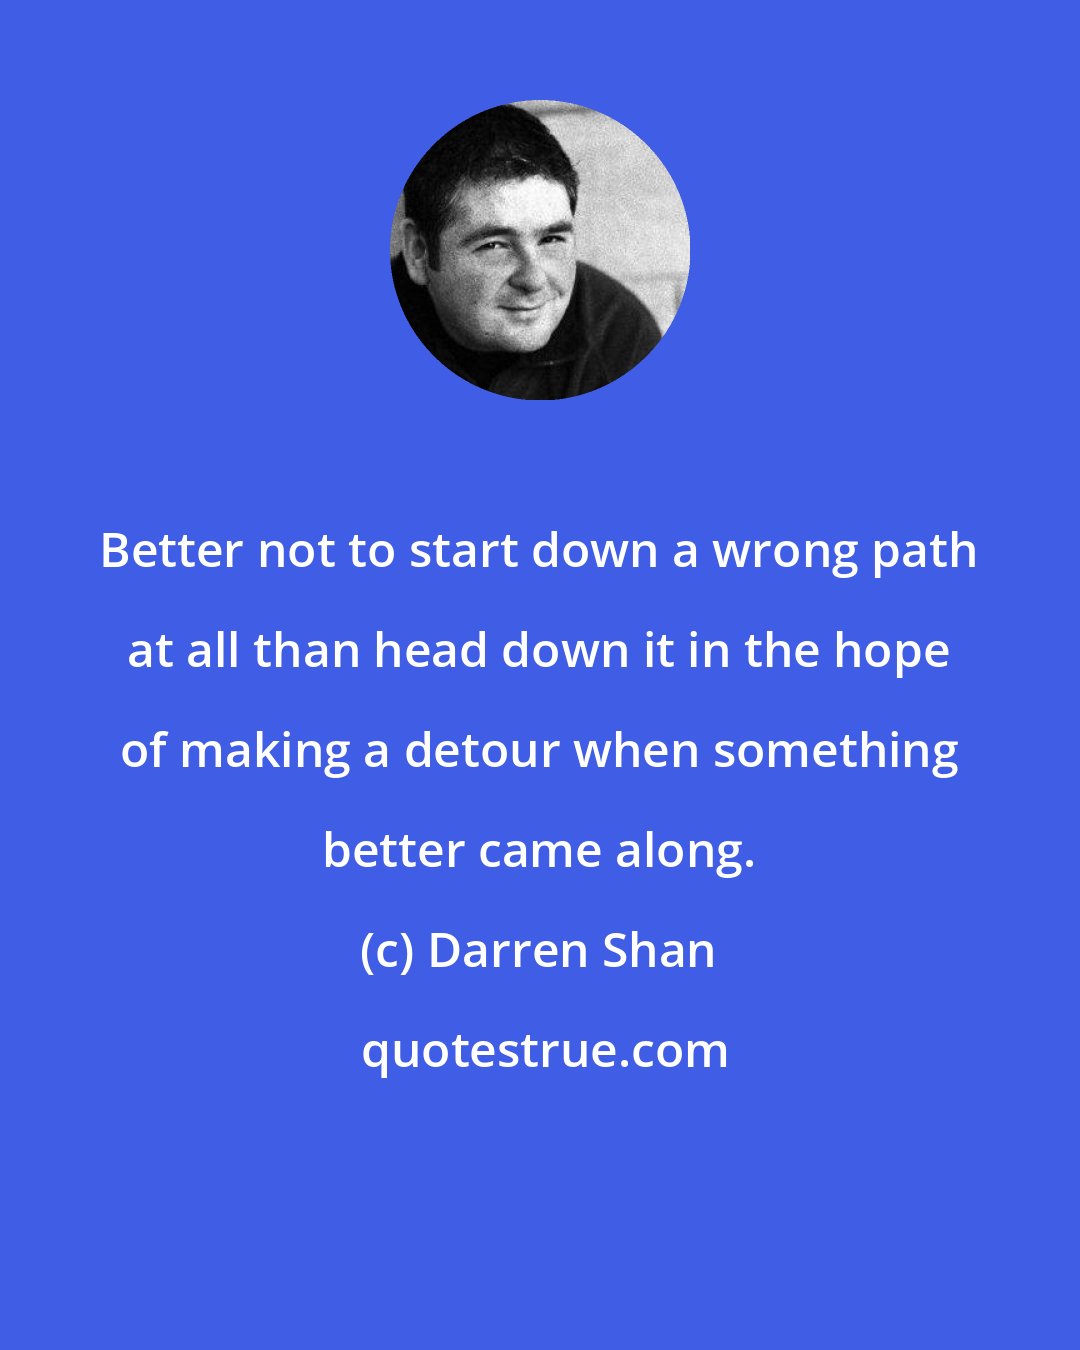 Darren Shan: Better not to start down a wrong path at all than head down it in the hope of making a detour when something better came along.